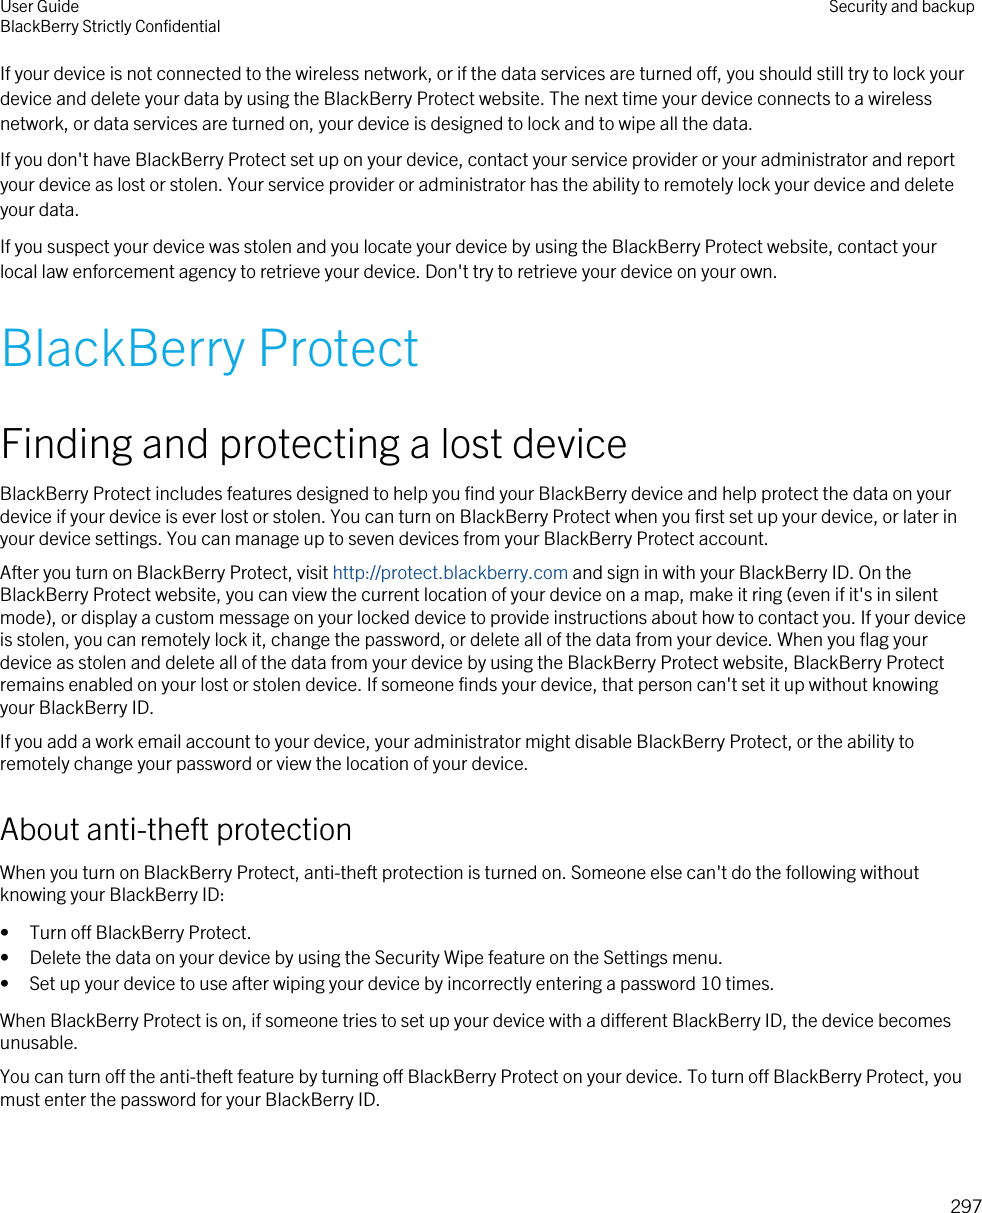 If your device is not connected to the wireless network, or if the data services are turned off, you should still try to lock your device and delete your data by using the BlackBerry Protect website. The next time your device connects to a wireless network, or data services are turned on, your device is designed to lock and to wipe all the data.If you don&apos;t have BlackBerry Protect set up on your device, contact your service provider or your administrator and report your device as lost or stolen. Your service provider or administrator has the ability to remotely lock your device and delete your data.If you suspect your device was stolen and you locate your device by using the BlackBerry Protect website, contact your local law enforcement agency to retrieve your device. Don&apos;t try to retrieve your device on your own.BlackBerry ProtectFinding and protecting a lost deviceBlackBerry Protect includes features designed to help you find your BlackBerry device and help protect the data on your device if your device is ever lost or stolen. You can turn on BlackBerry Protect when you first set up your device, or later in your device settings. You can manage up to seven devices from your BlackBerry Protect account.After you turn on BlackBerry Protect, visit http://protect.blackberry.com and sign in with your BlackBerry ID. On the BlackBerry Protect website, you can view the current location of your device on a map, make it ring (even if it&apos;s in silent mode), or display a custom message on your locked device to provide instructions about how to contact you. If your device is stolen, you can remotely lock it, change the password, or delete all of the data from your device. When you flag your device as stolen and delete all of the data from your device by using the BlackBerry Protect website, BlackBerry Protect remains enabled on your lost or stolen device. If someone finds your device, that person can&apos;t set it up without knowing your BlackBerry ID.If you add a work email account to your device, your administrator might disable BlackBerry Protect, or the ability to remotely change your password or view the location of your device.About anti-theft protectionWhen you turn on BlackBerry Protect, anti-theft protection is turned on. Someone else can&apos;t do the following without knowing your BlackBerry ID:• Turn off BlackBerry Protect.• Delete the data on your device by using the Security Wipe feature on the Settings menu.• Set up your device to use after wiping your device by incorrectly entering a password 10 times.When BlackBerry Protect is on, if someone tries to set up your device with a different BlackBerry ID, the device becomes unusable.You can turn off the anti-theft feature by turning off BlackBerry Protect on your device. To turn off BlackBerry Protect, you must enter the password for your BlackBerry ID.User GuideBlackBerry Strictly Confidential Security and backup297